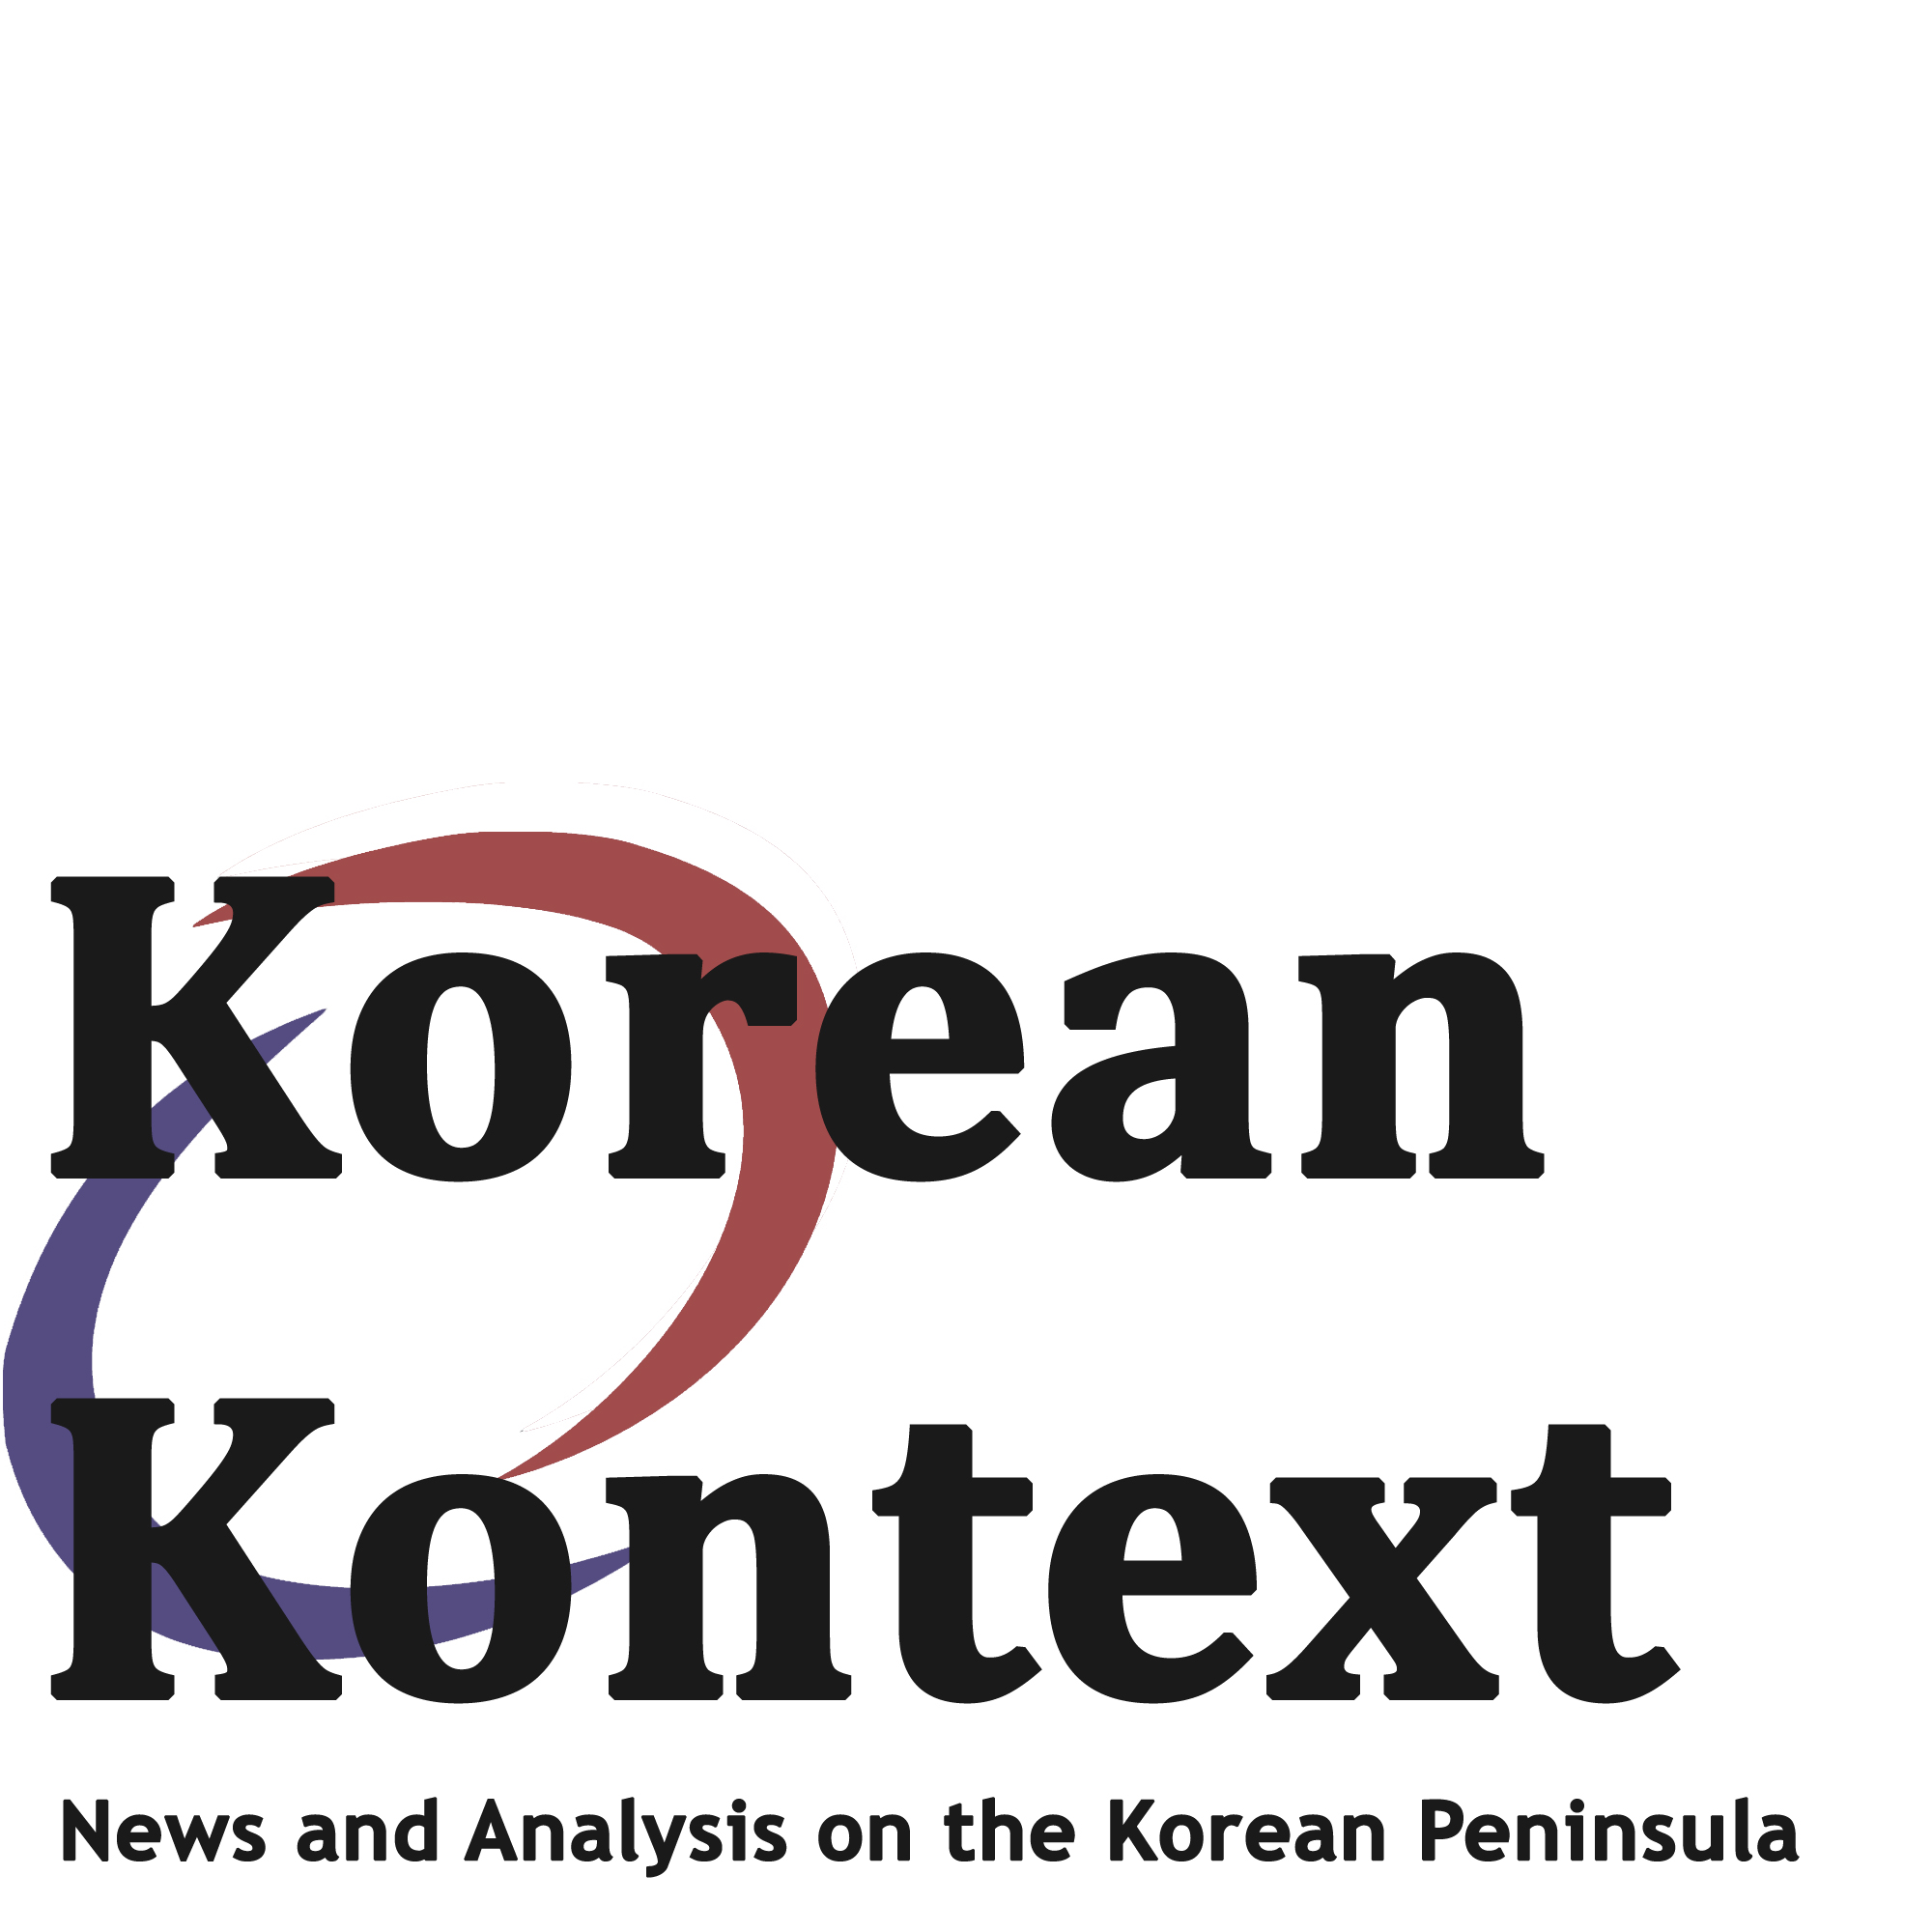 Examining Korea’s Economic Growth: A View from the OECD